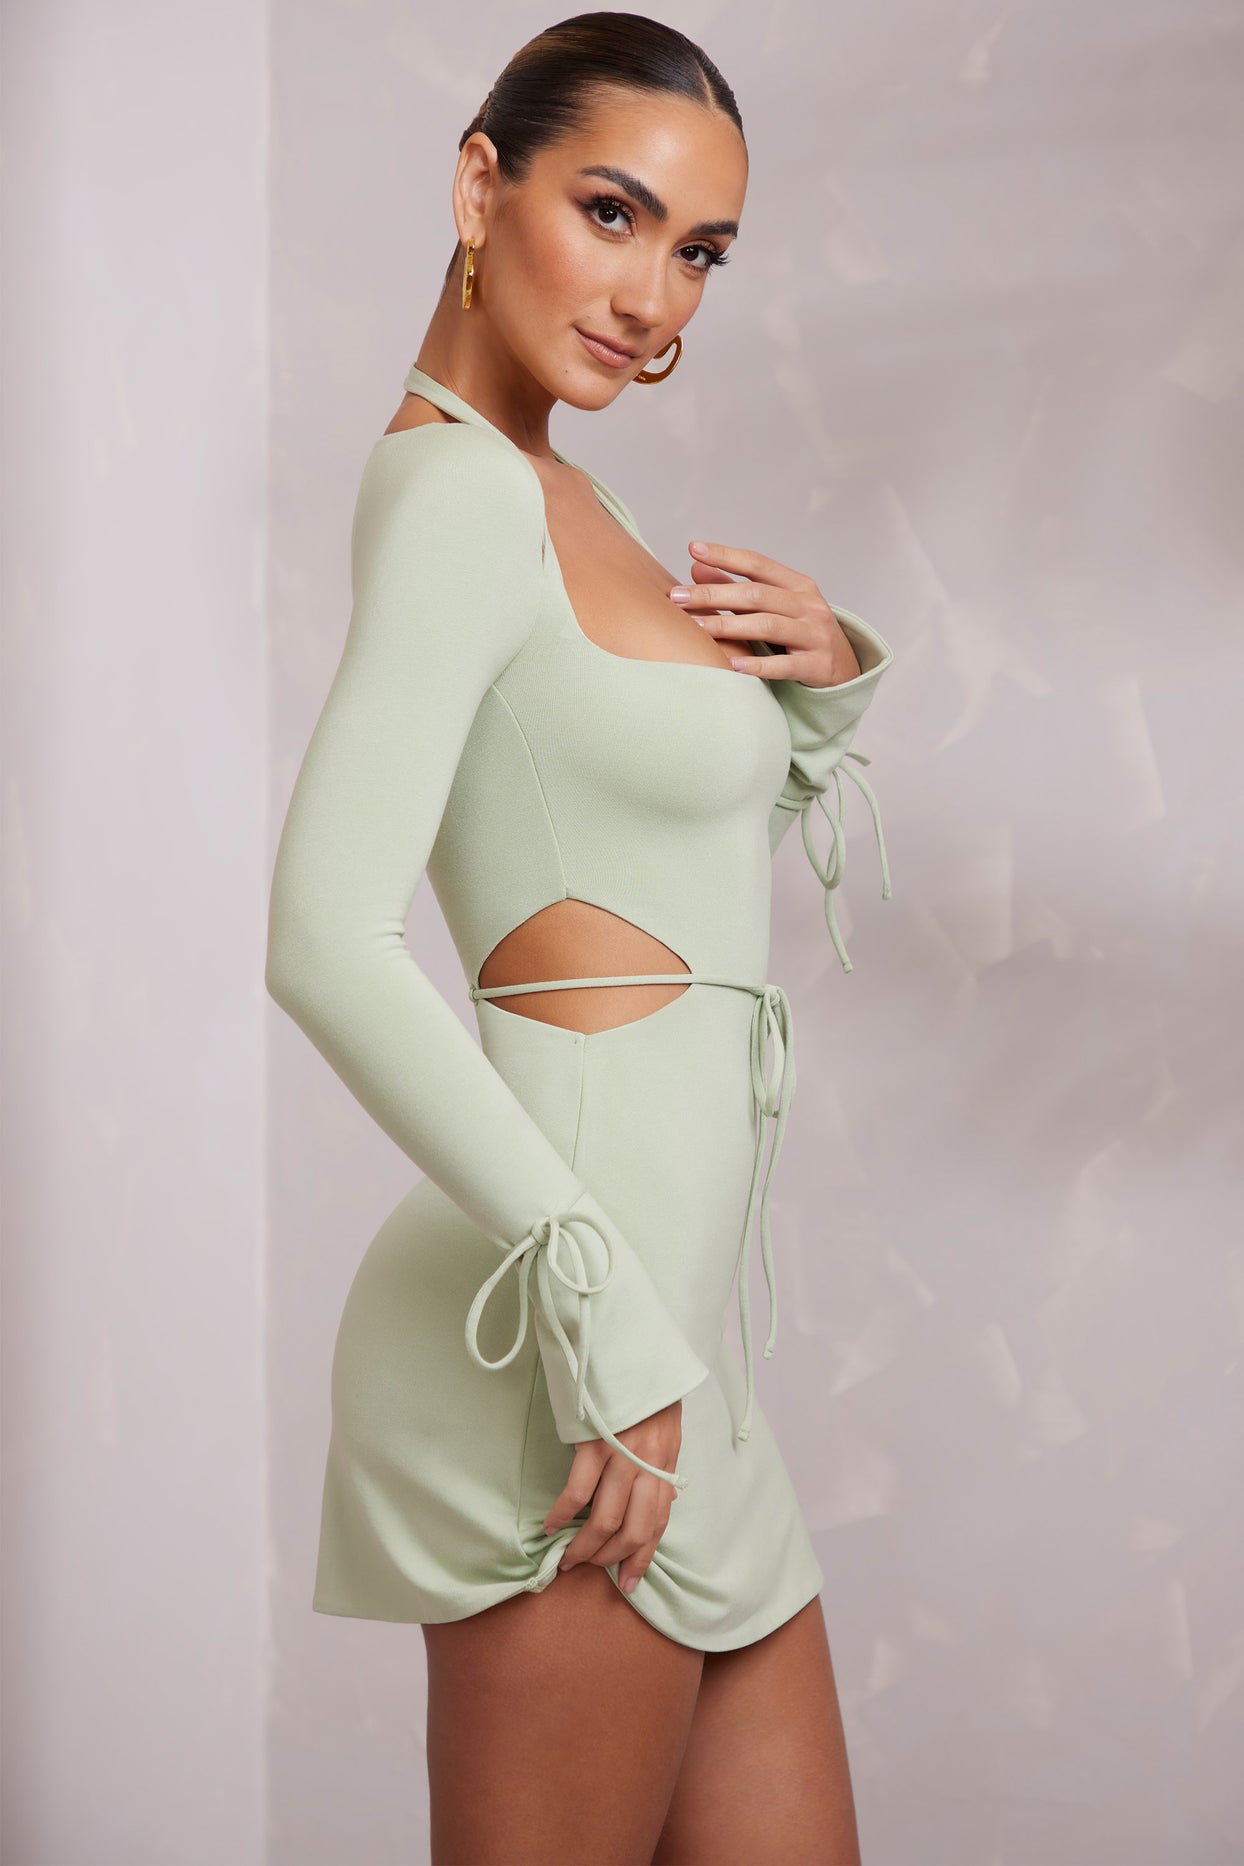 Long Sleeve Cut Out A-Line Mini Dress in Sage